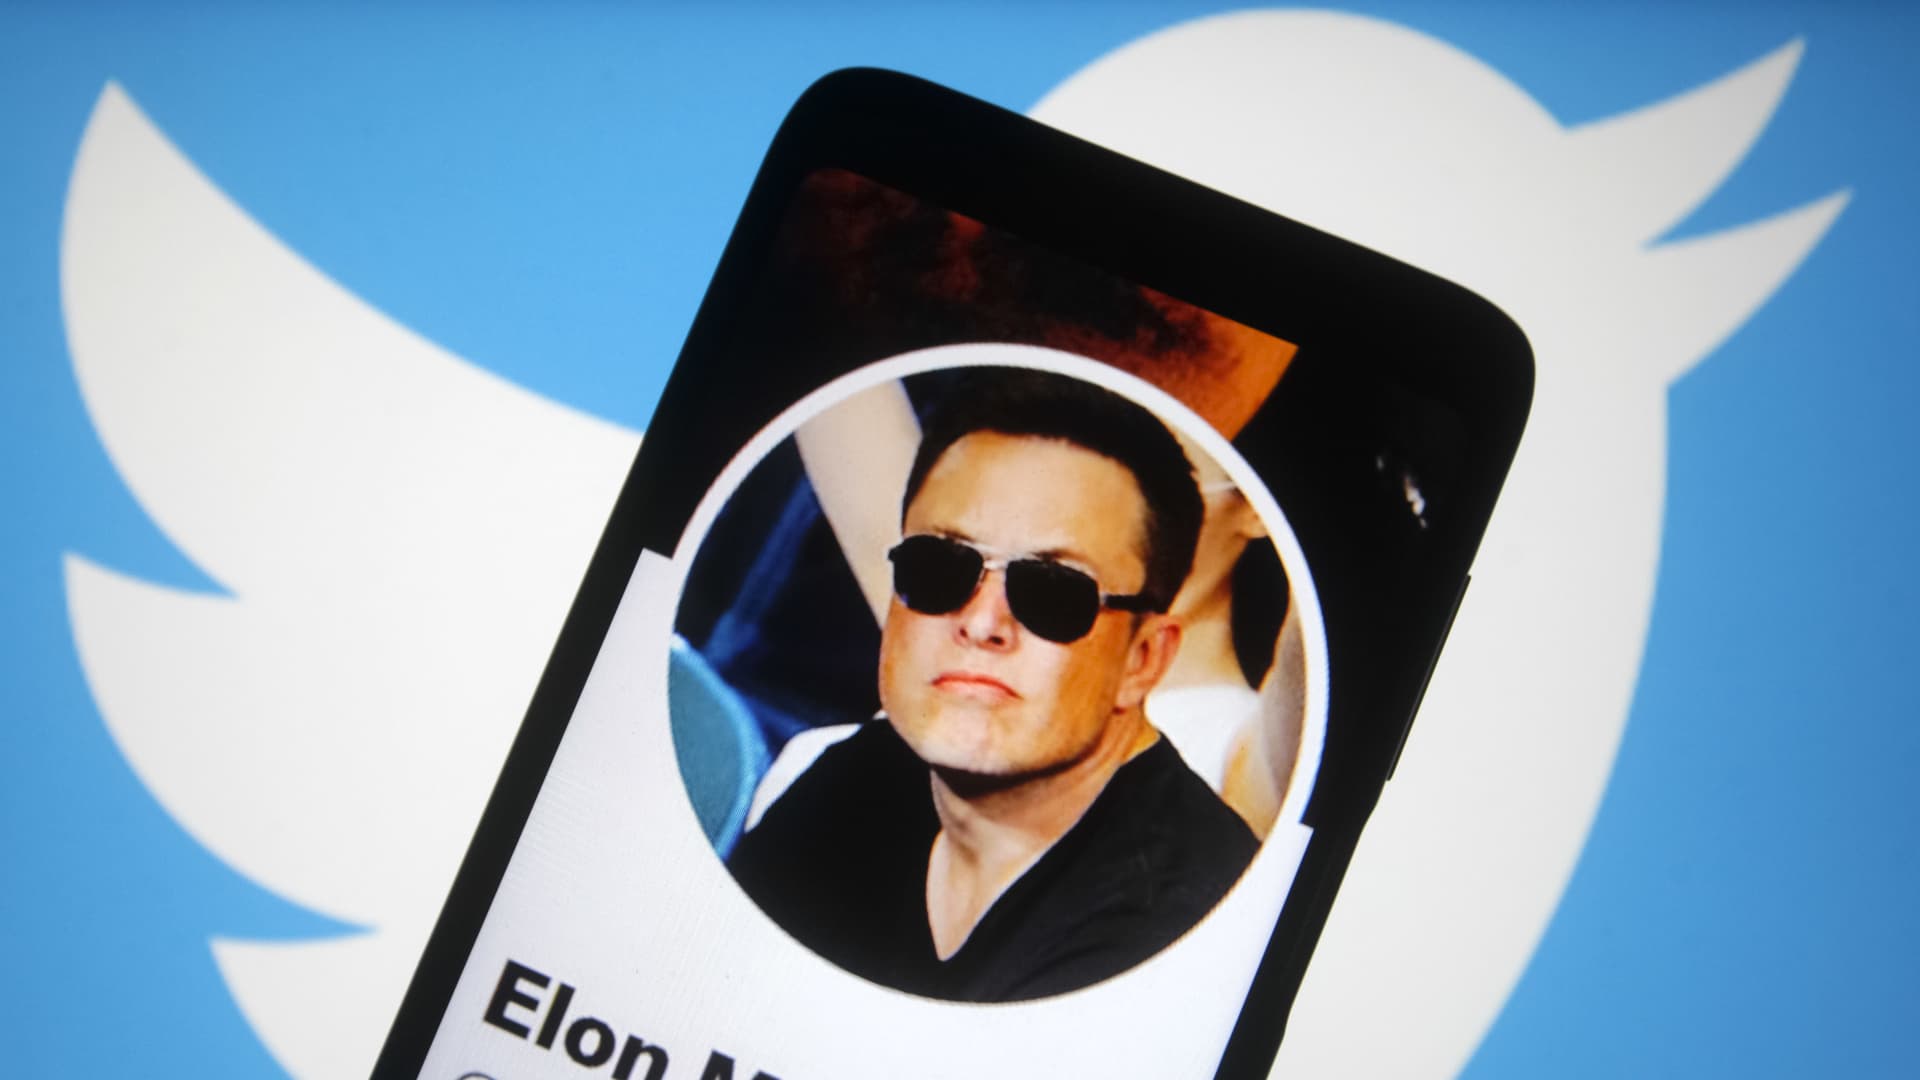 How Musk’s Twitter takeover plans shook Wall Street and social media